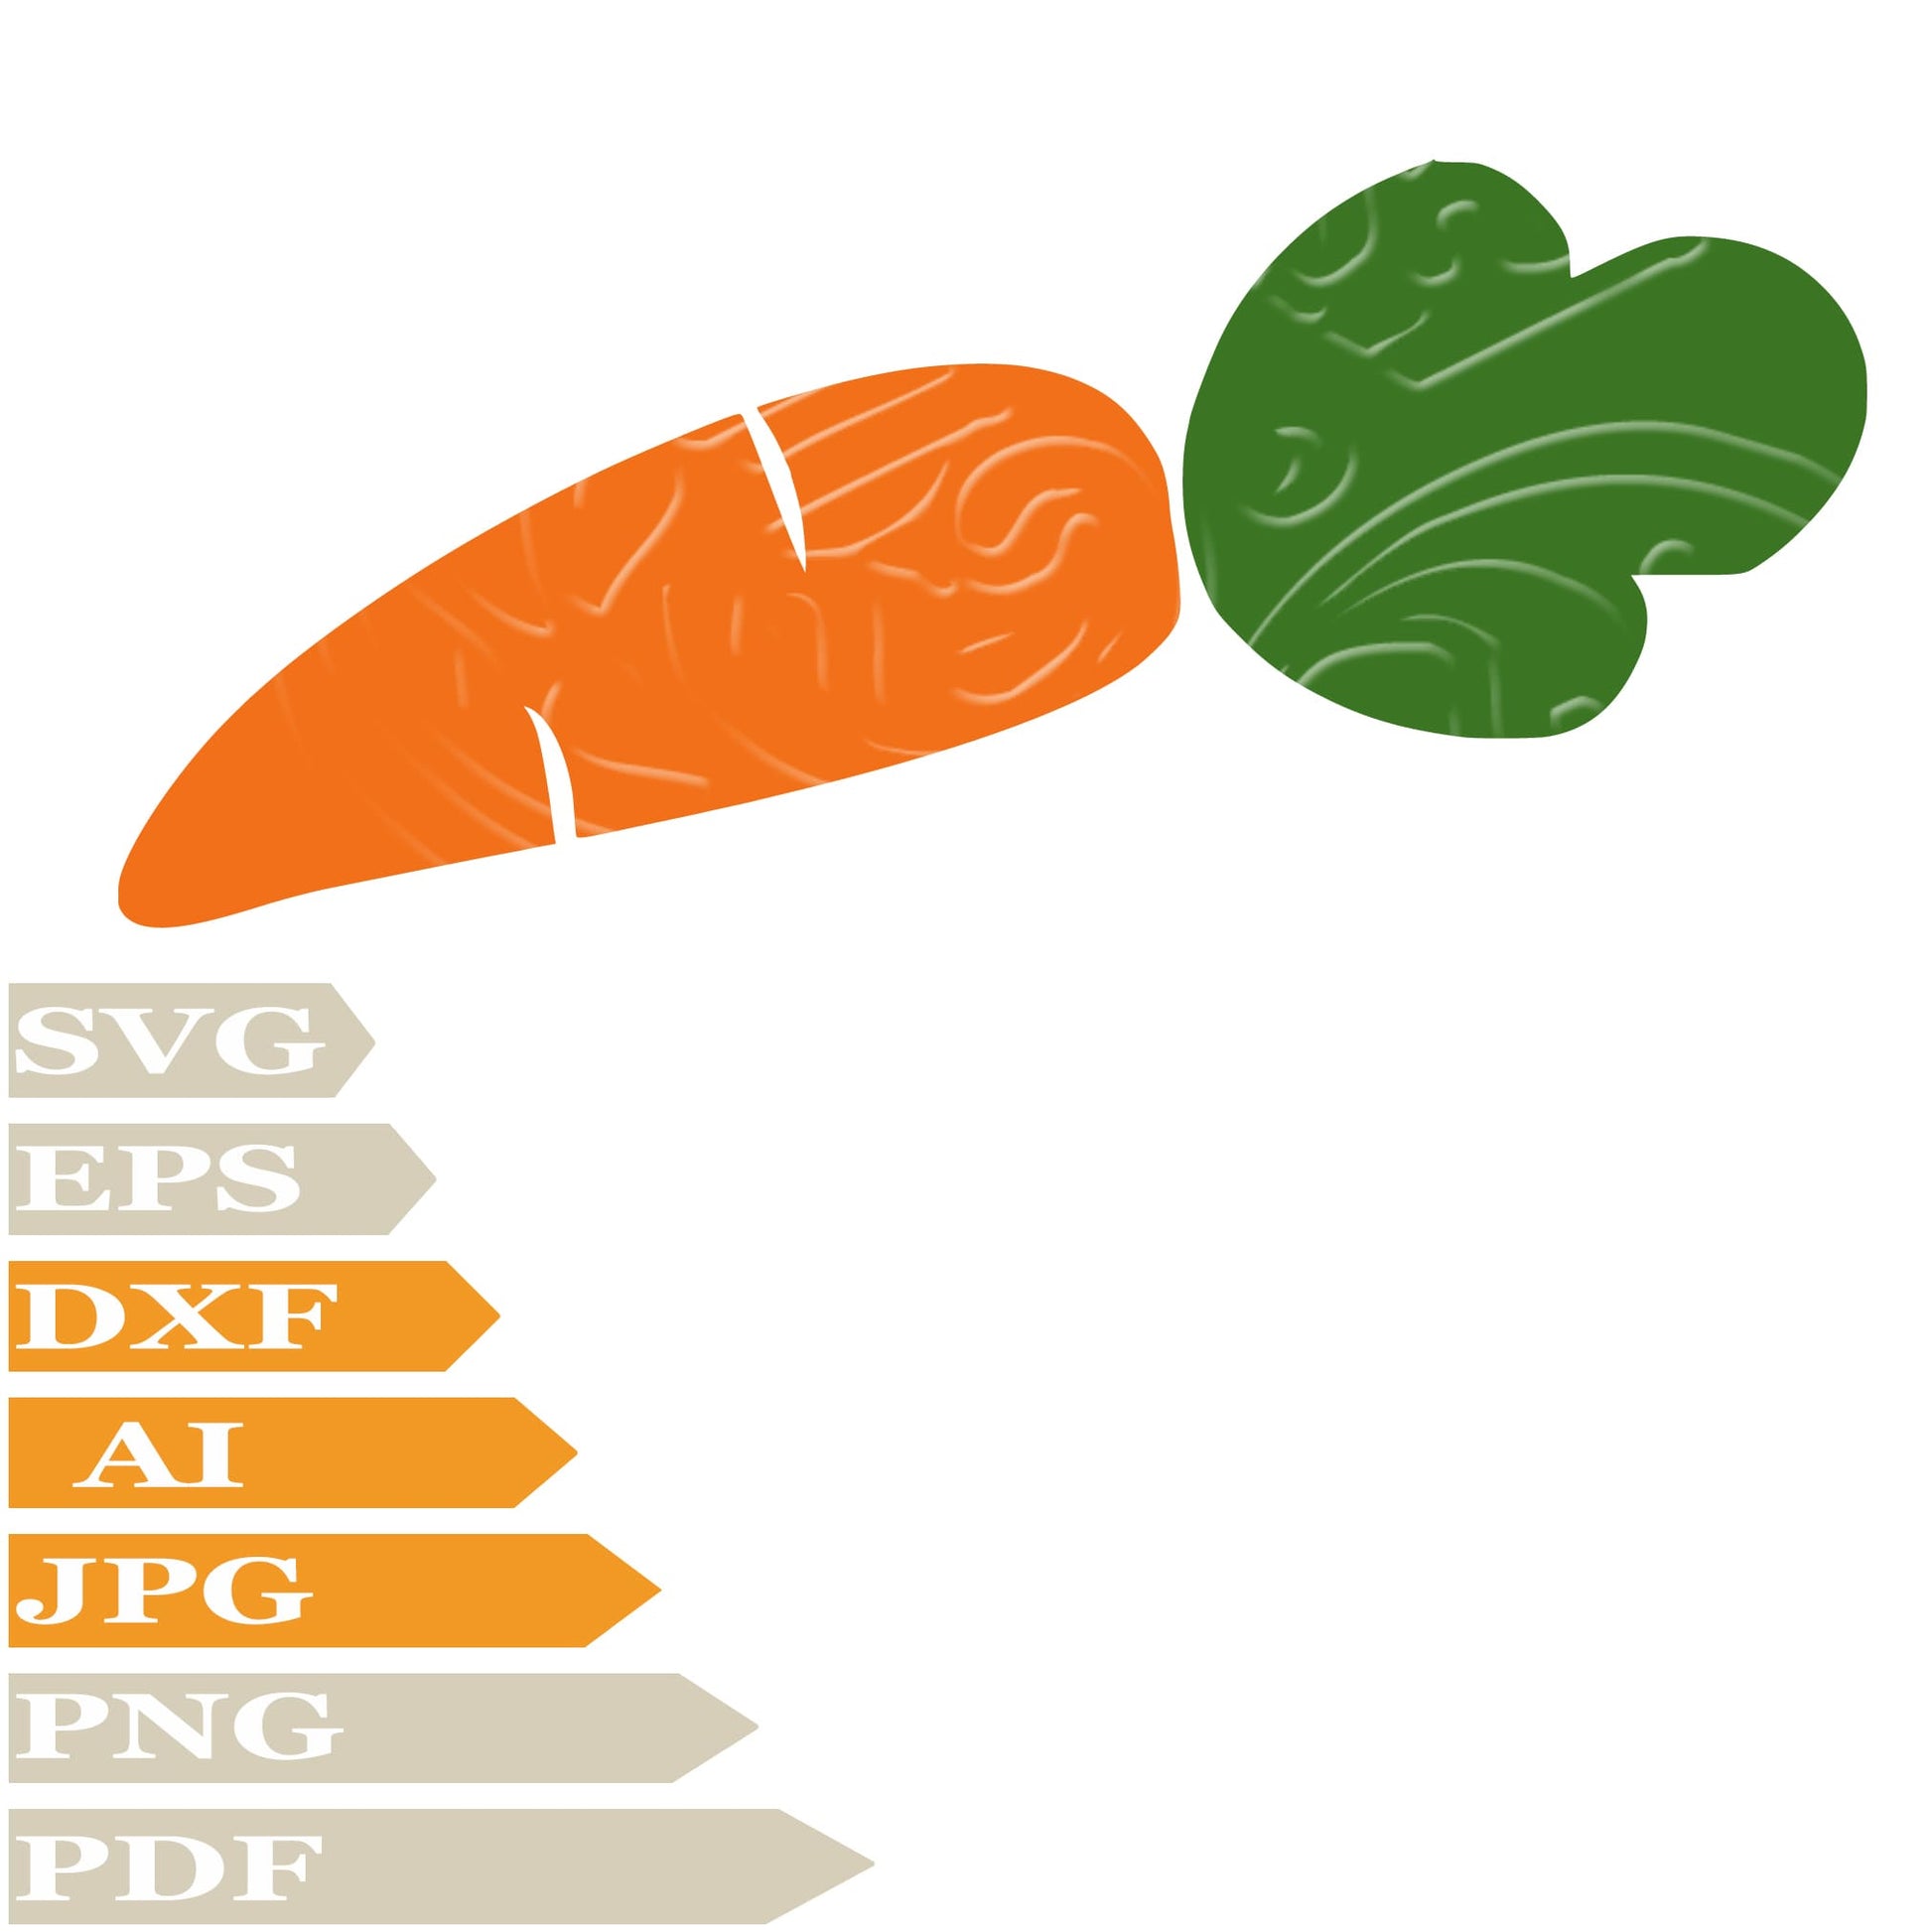 Carrot Svg File, Image Cut, Png, For Tattoo, Silhouette, Digital Vector Download, Cut File, Clipart, For Cricut